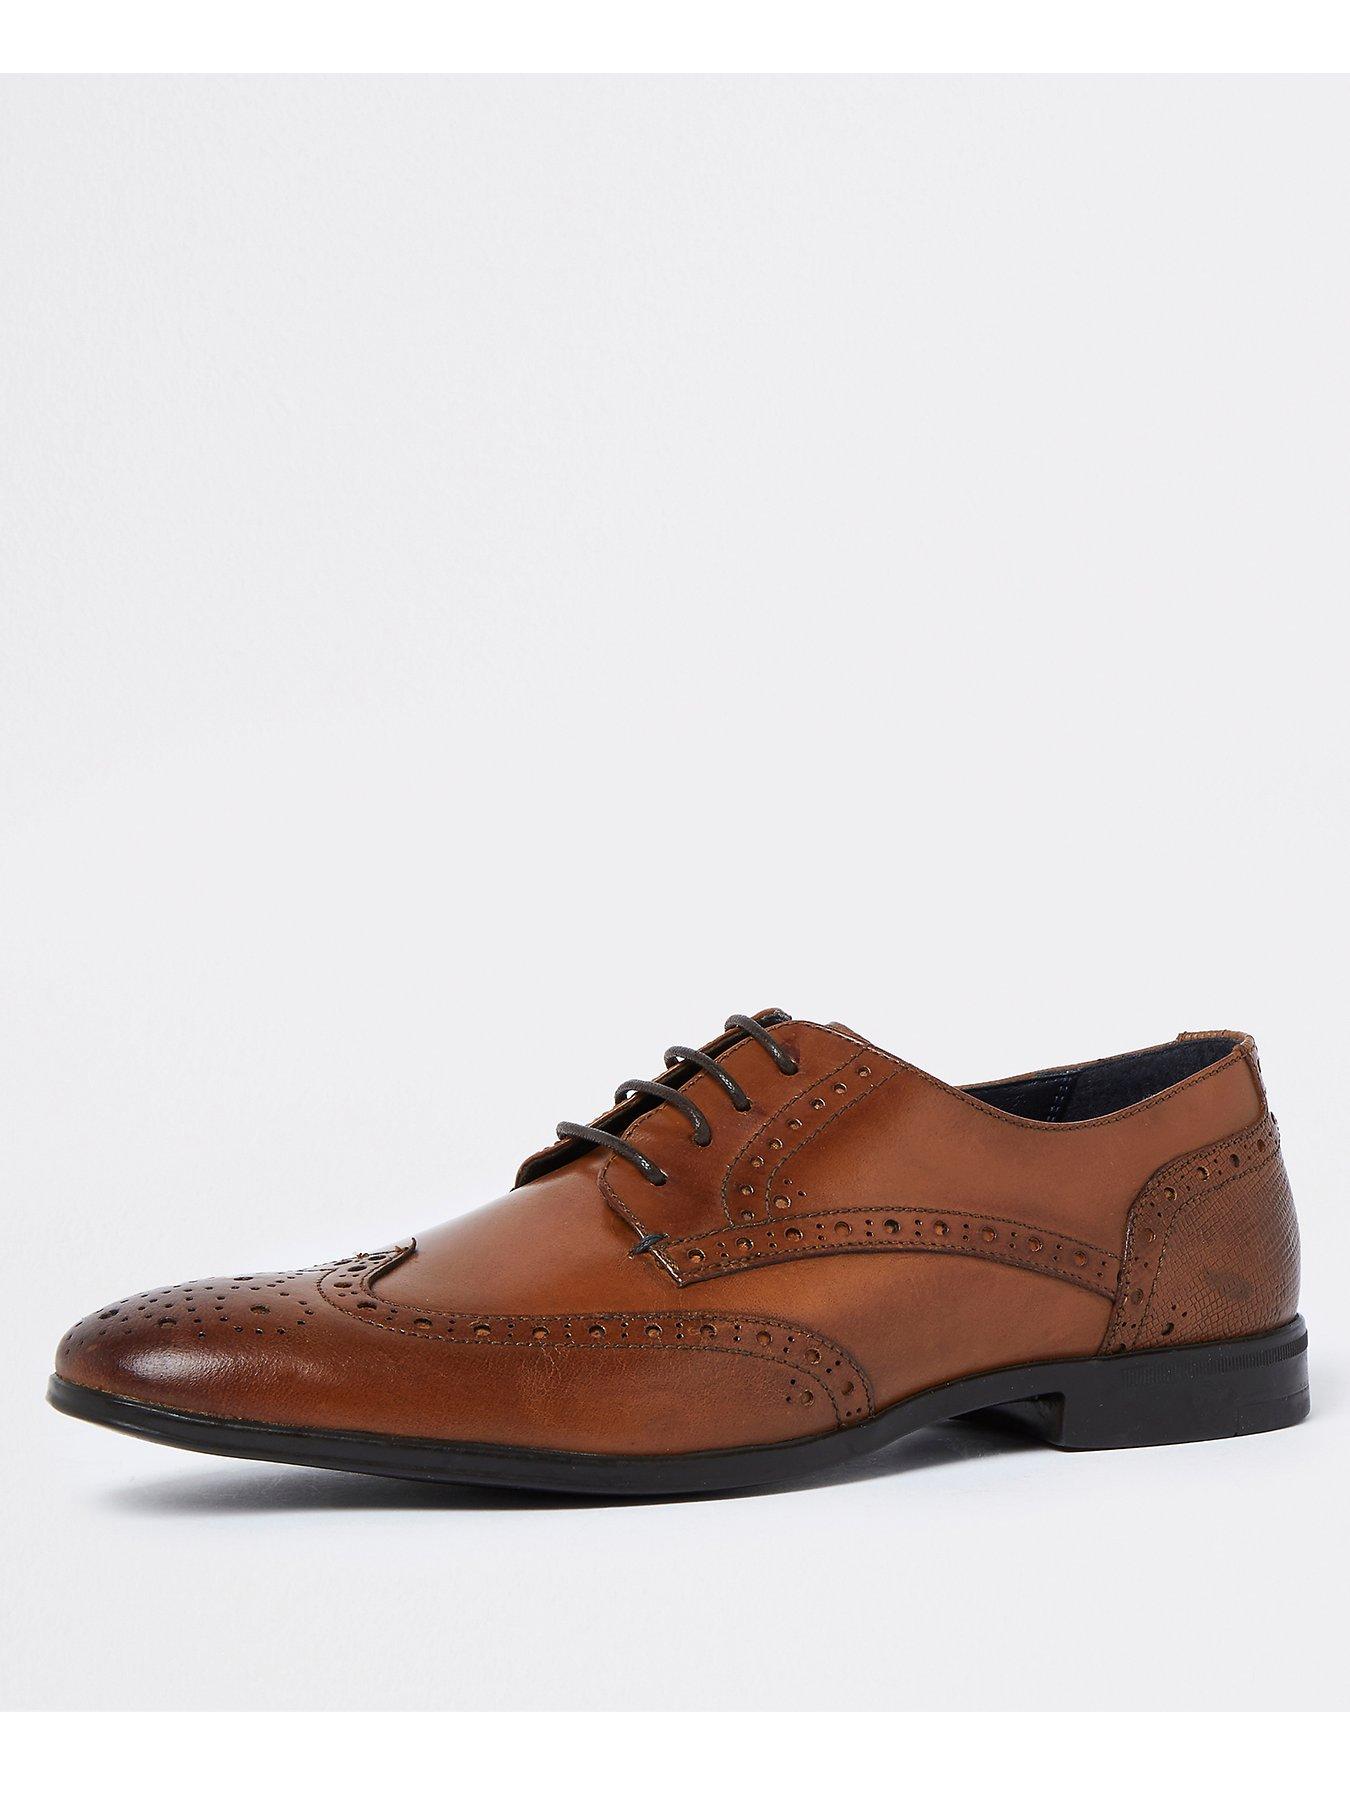  Lace Up Brogue Derby Shoes - Brown